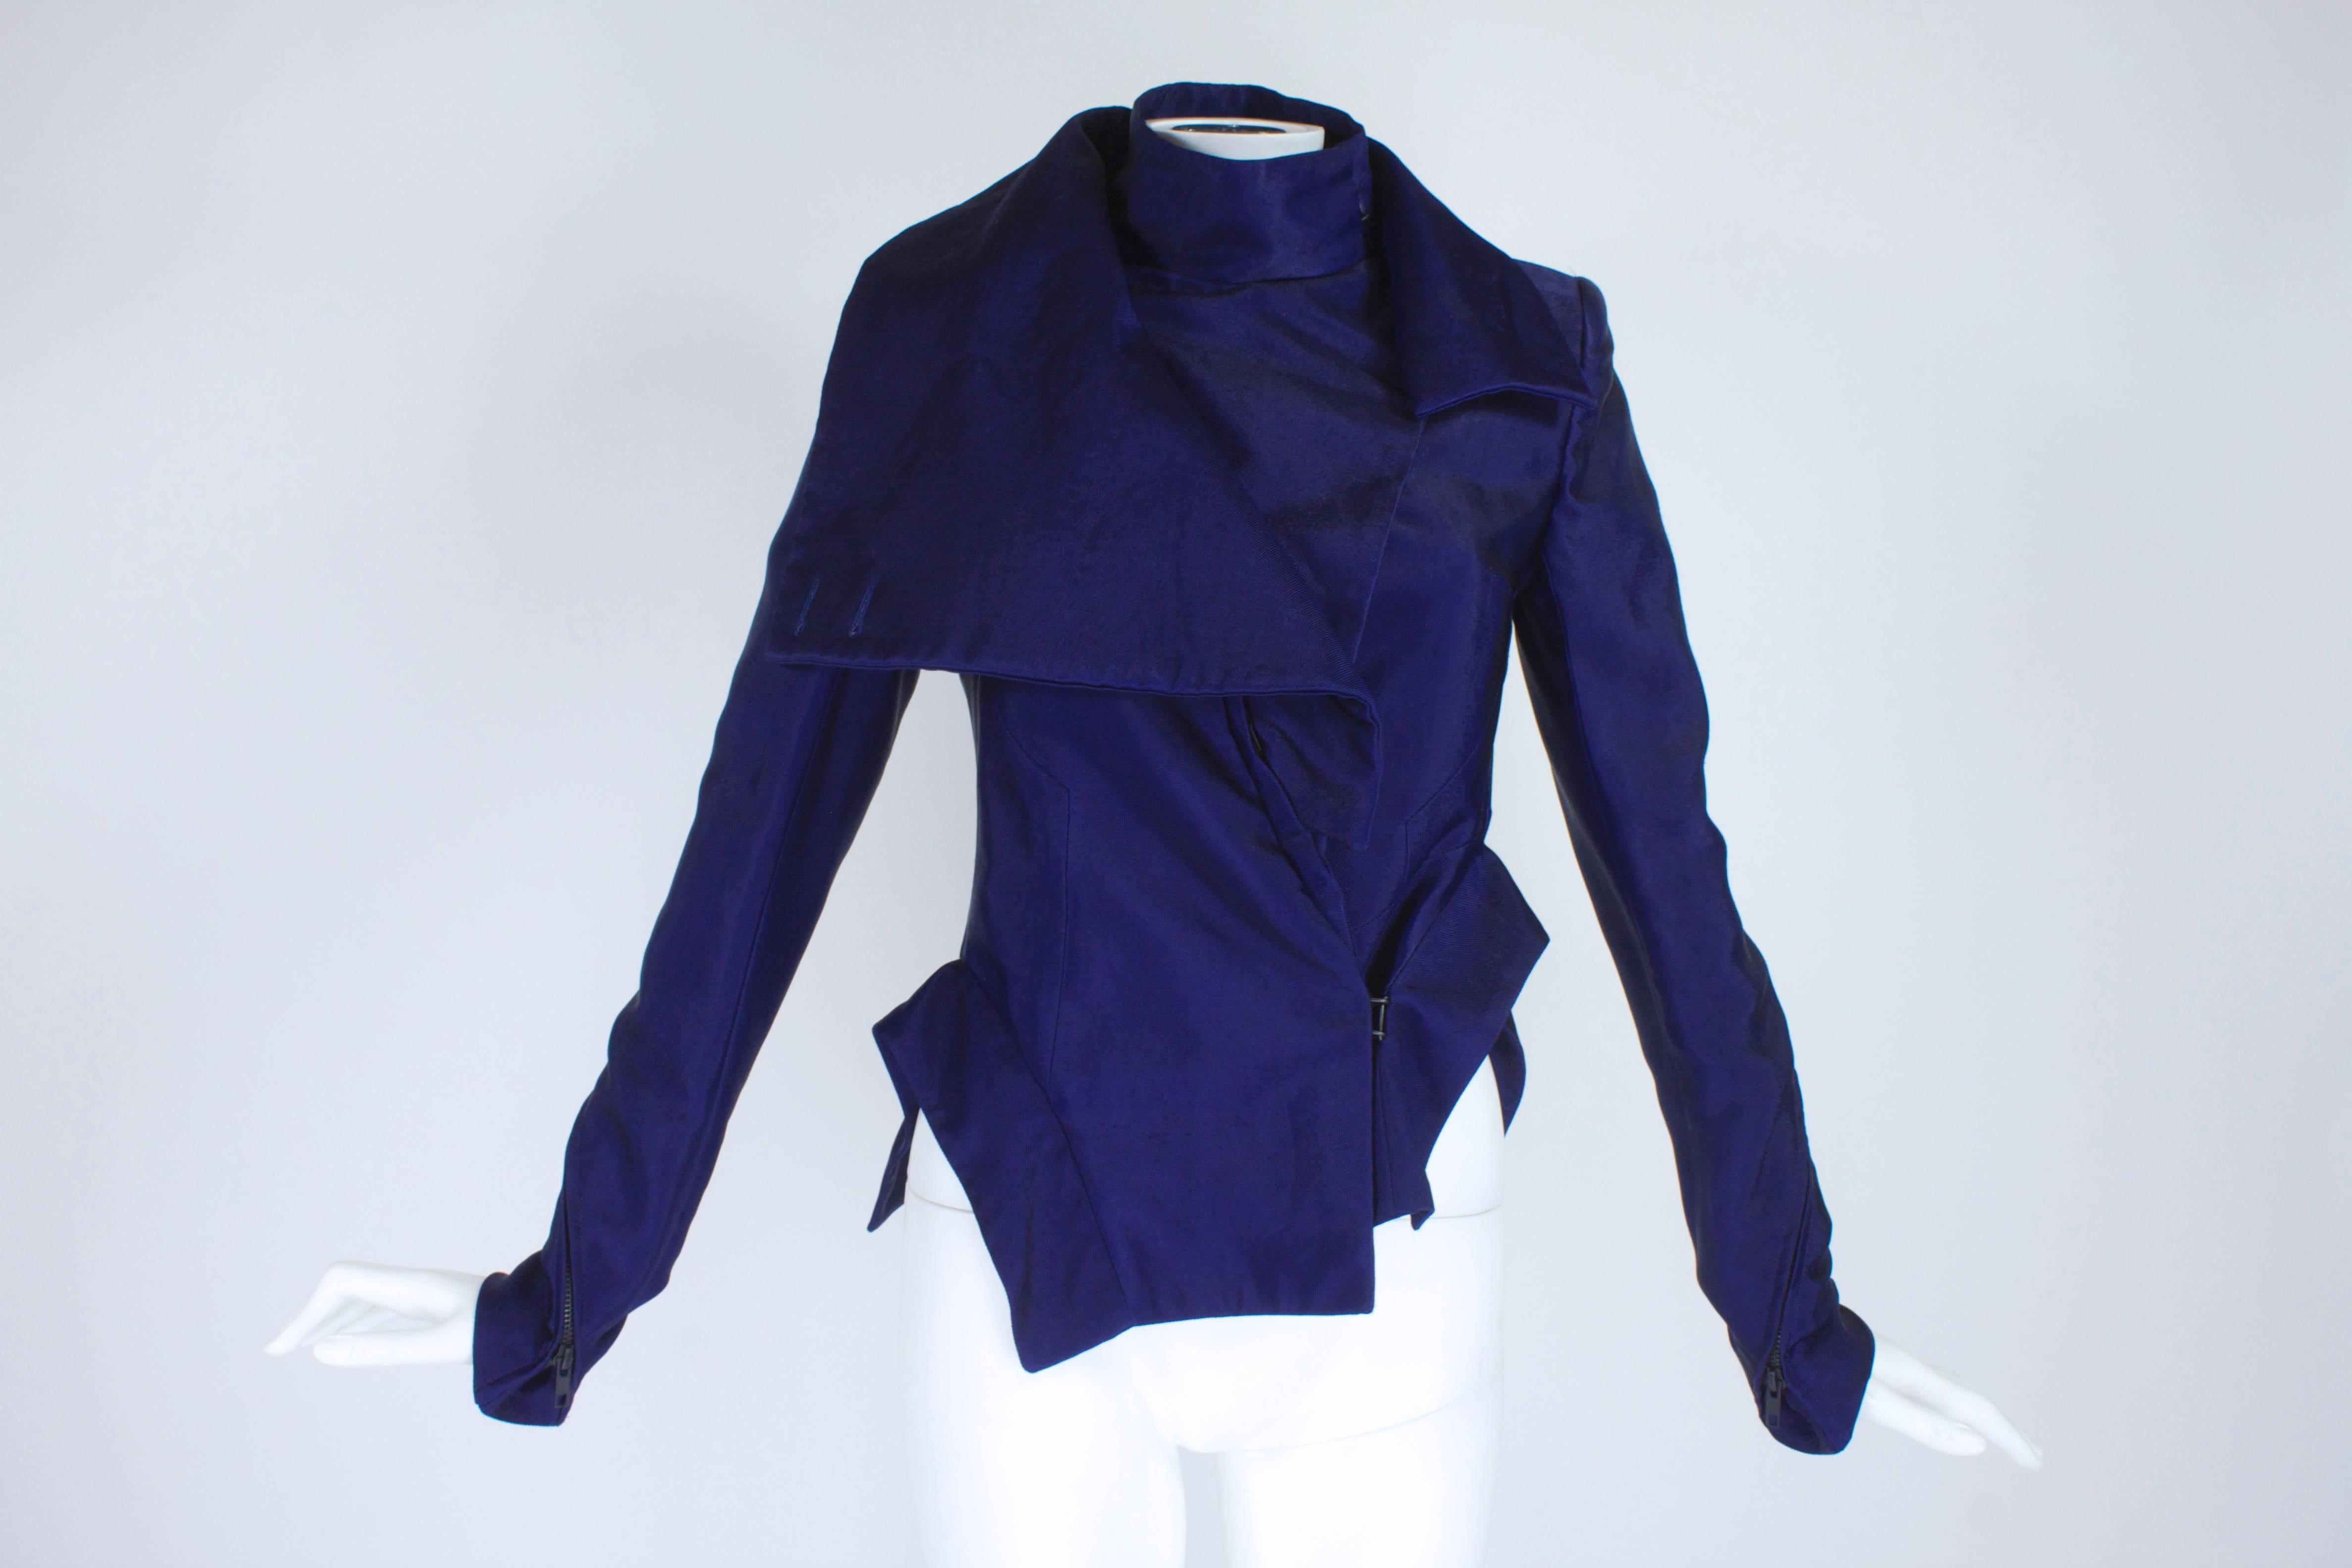 Ann Demeulemeester Asymmetrical Navy Moto Jacket with Zip Collar In Good Condition For Sale In Los Angeles, CA